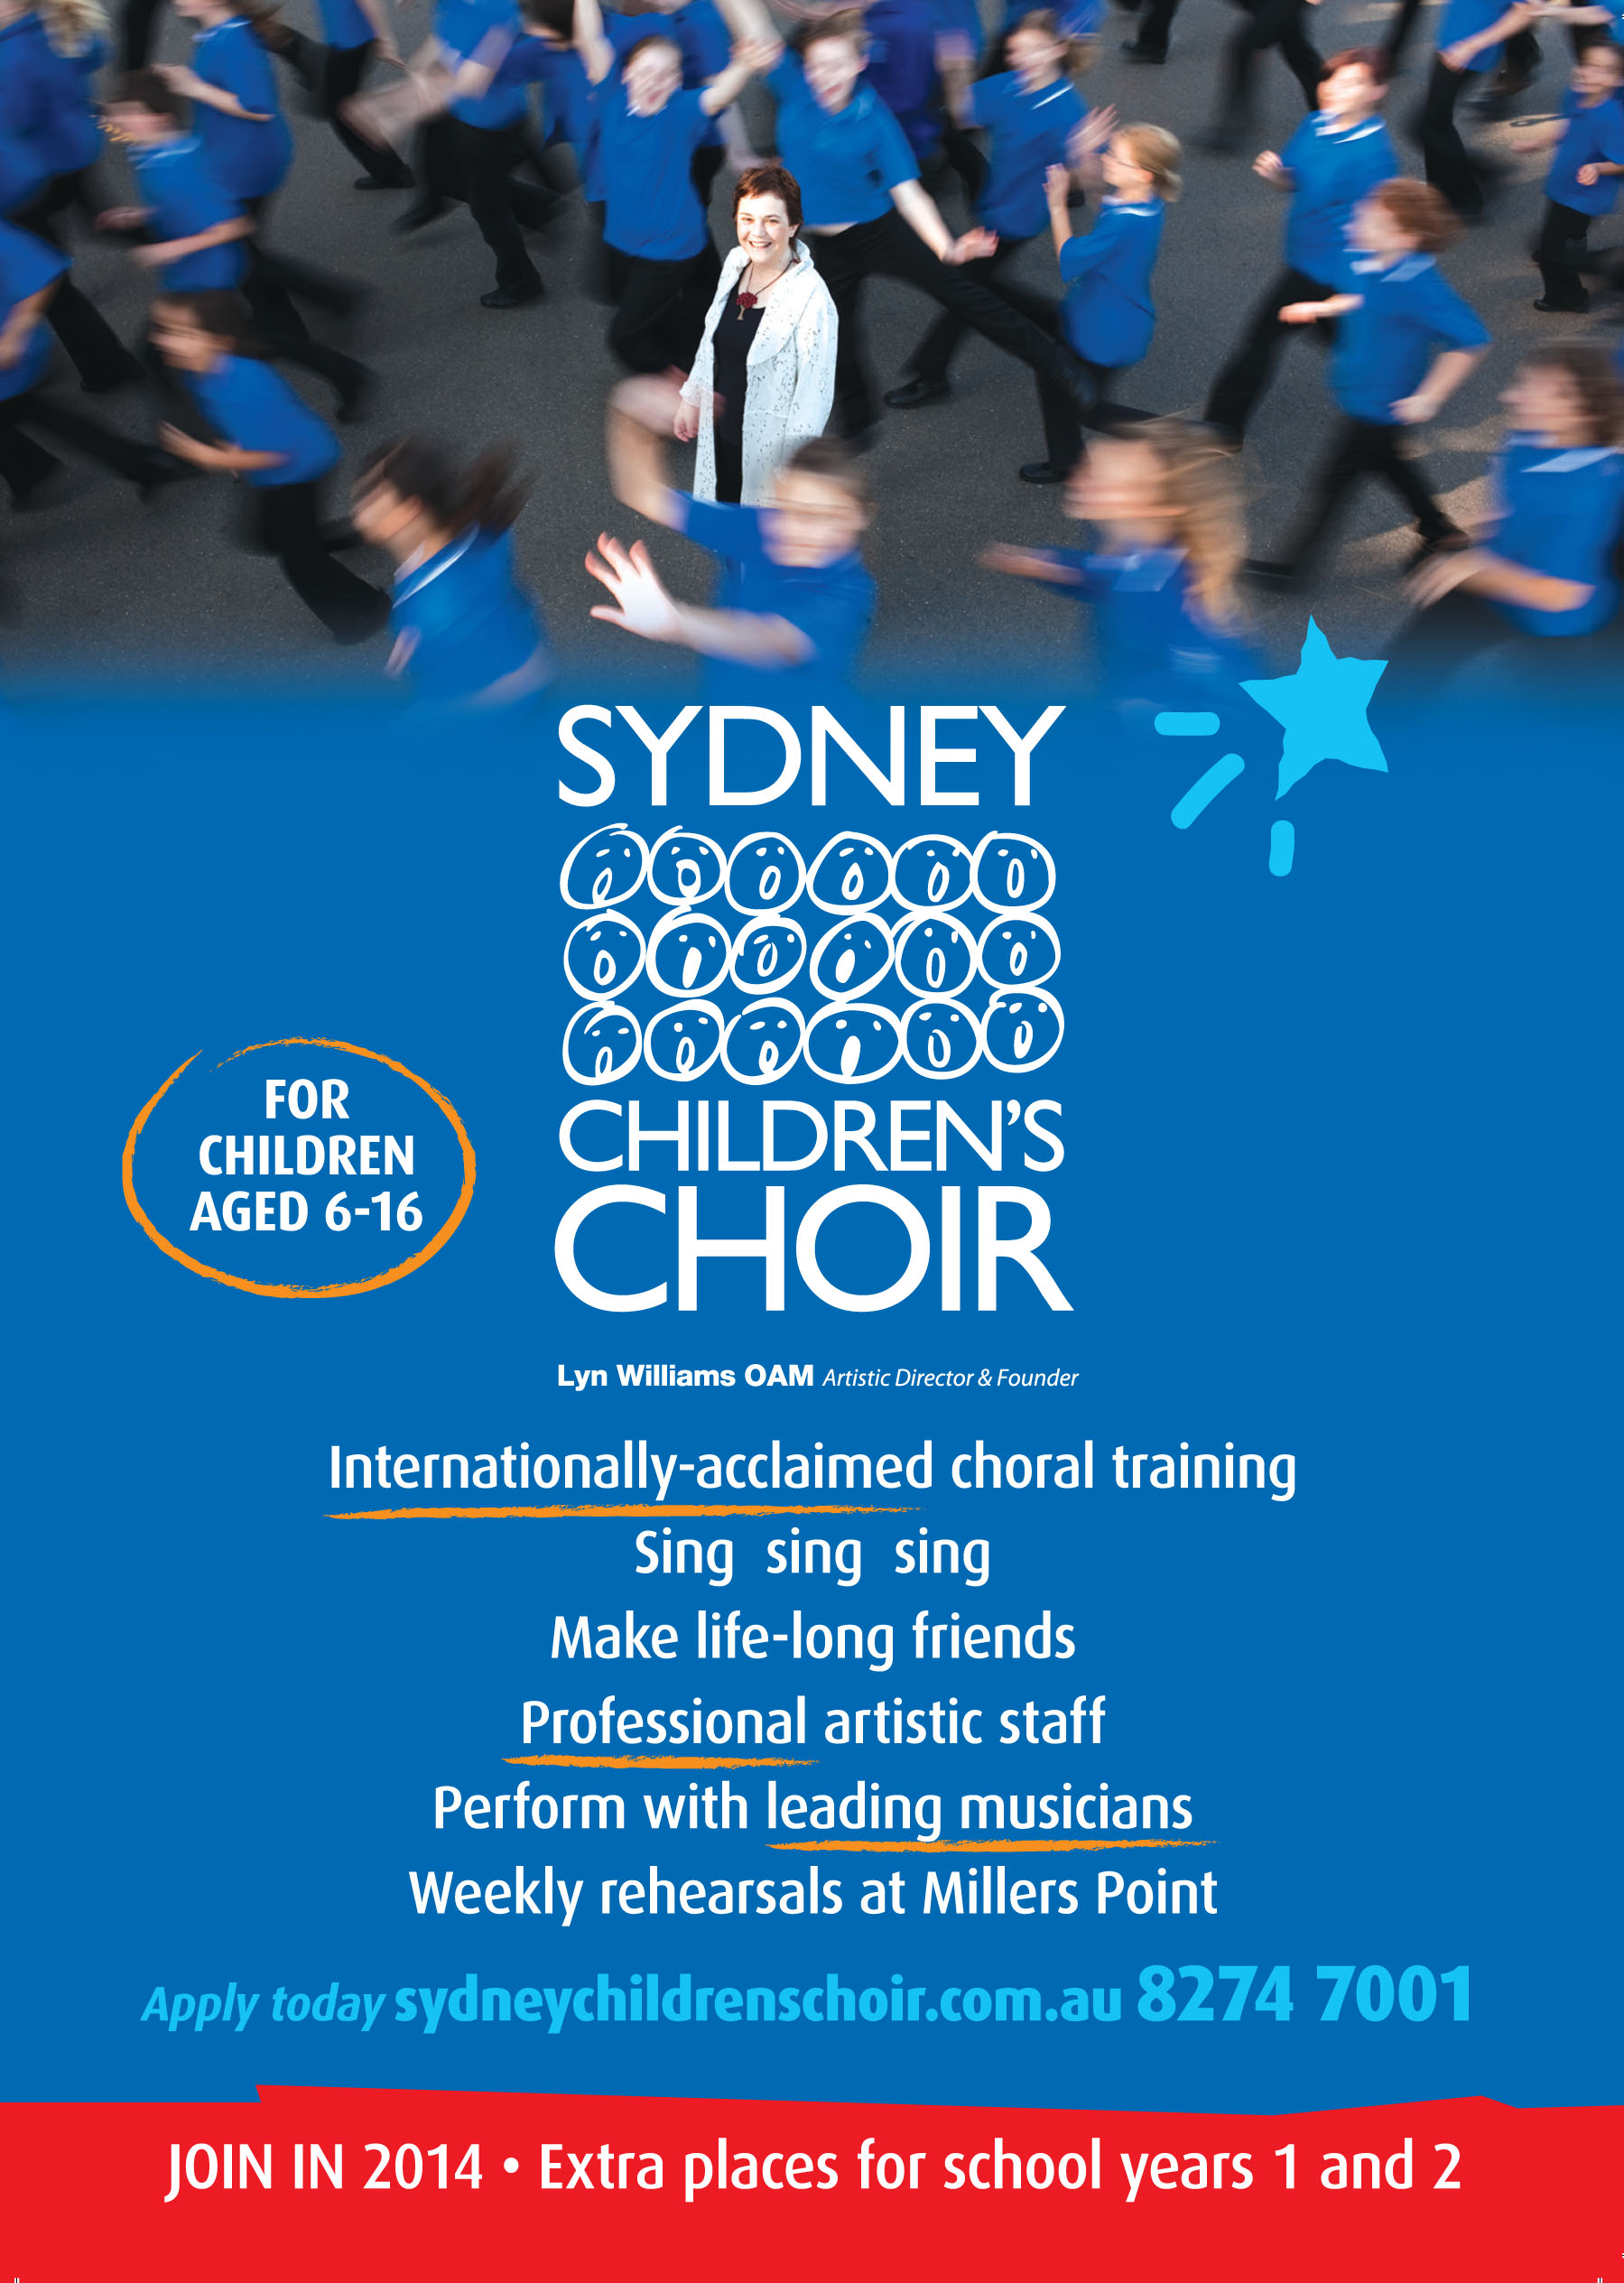 The Sydney Children’s Choir Is Recruiting For 2014